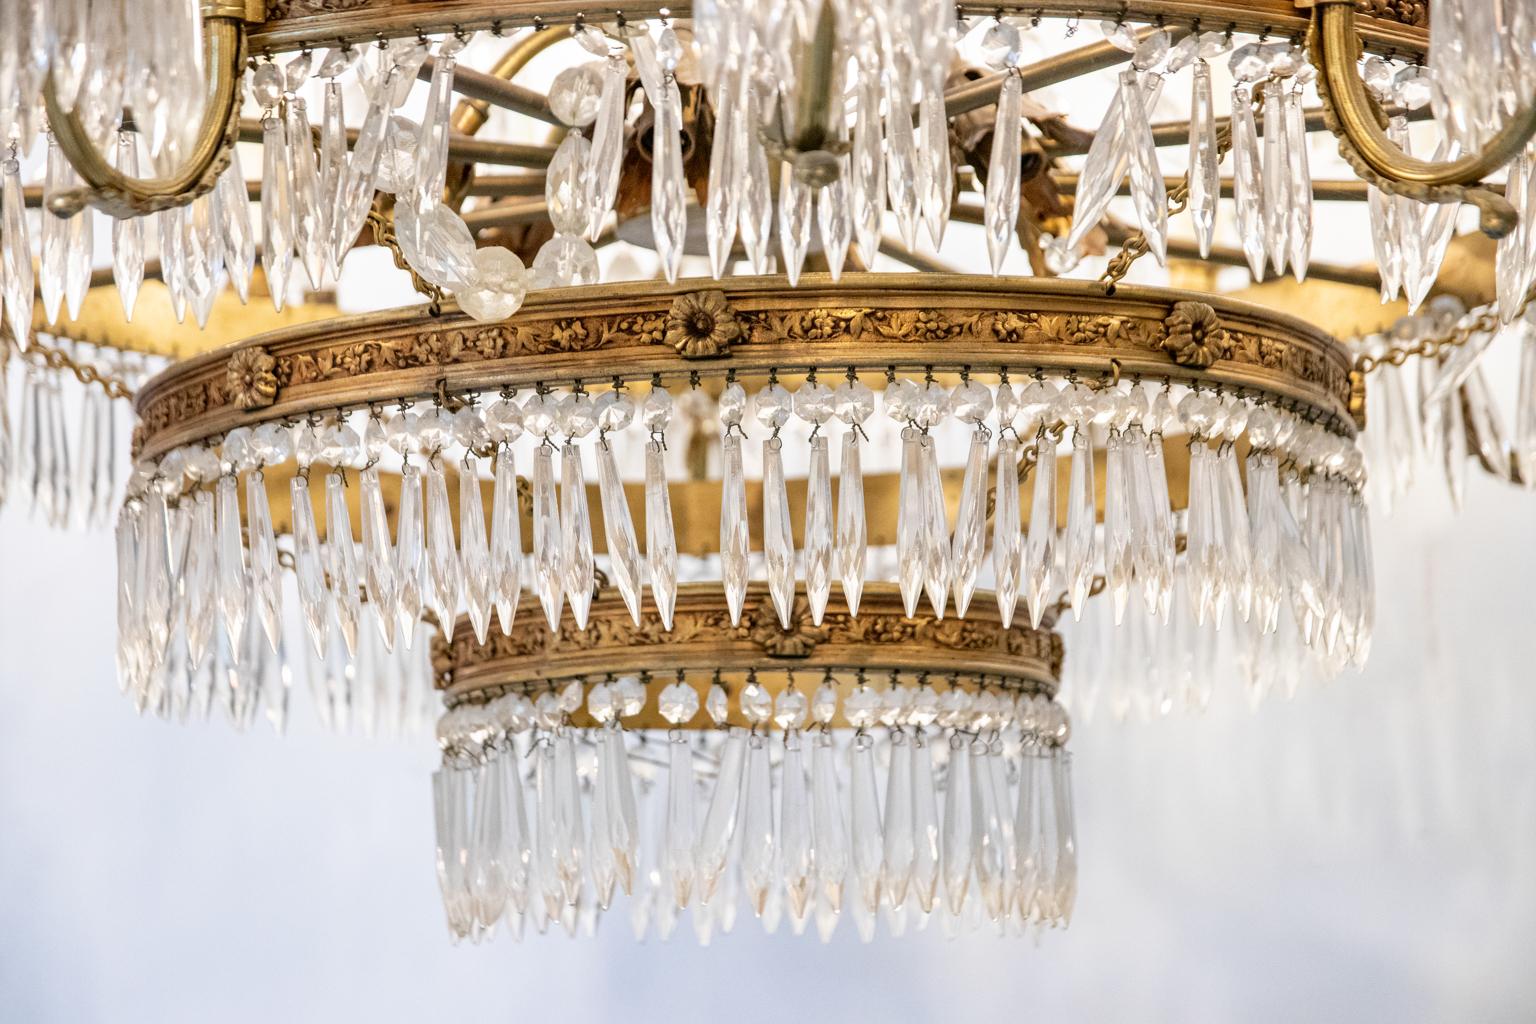 Thirteen arm crystal and bronze three tier chandelier with pendant pointed rectangular prisms and beaded strands of crystal. The piece further detailed with a scrolled acanthus leaves on the top of the chandelier, pointed spear shaped crystal